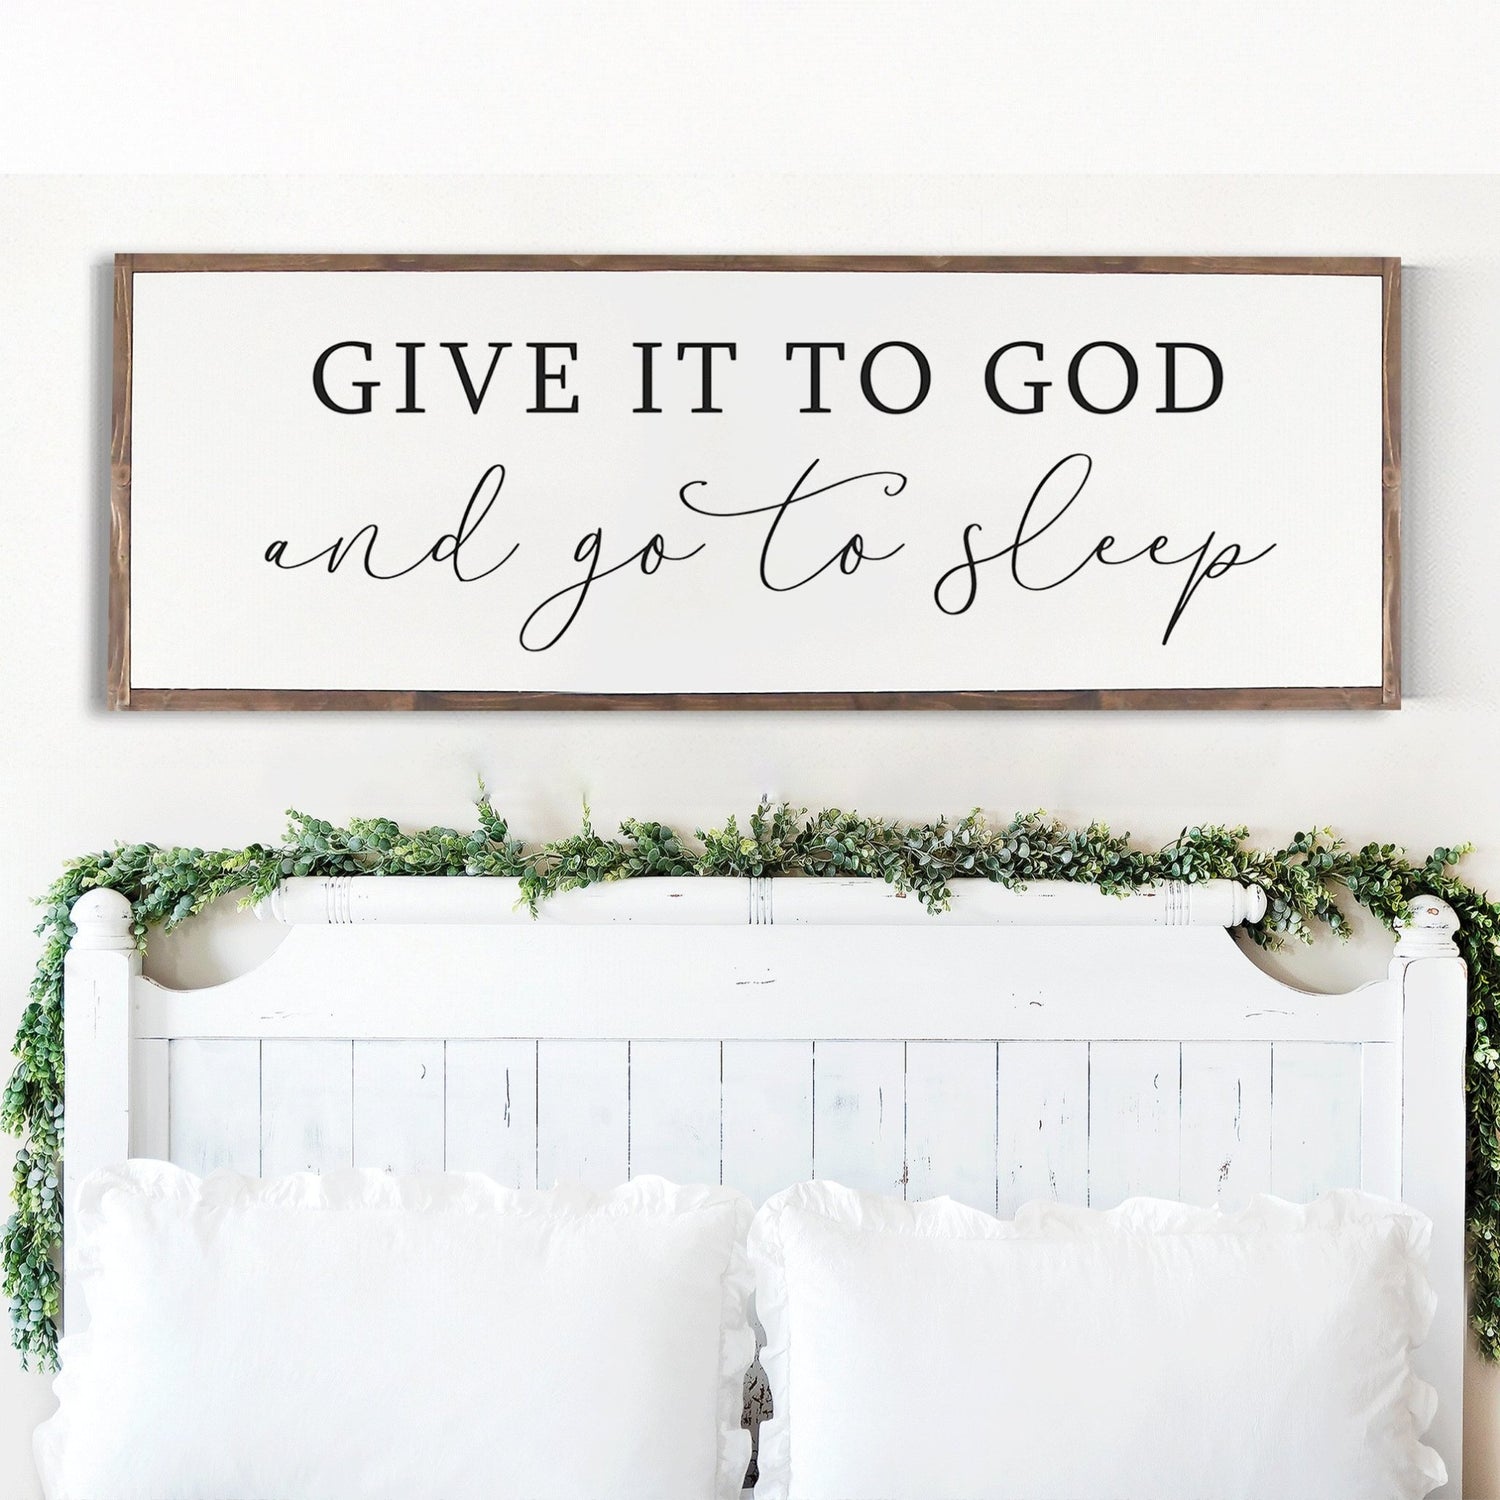 Give It to God and go to sleep Wood Sign, Hand Painted, Rustic Wood Sign BEDROOM SIGN - Forever Written